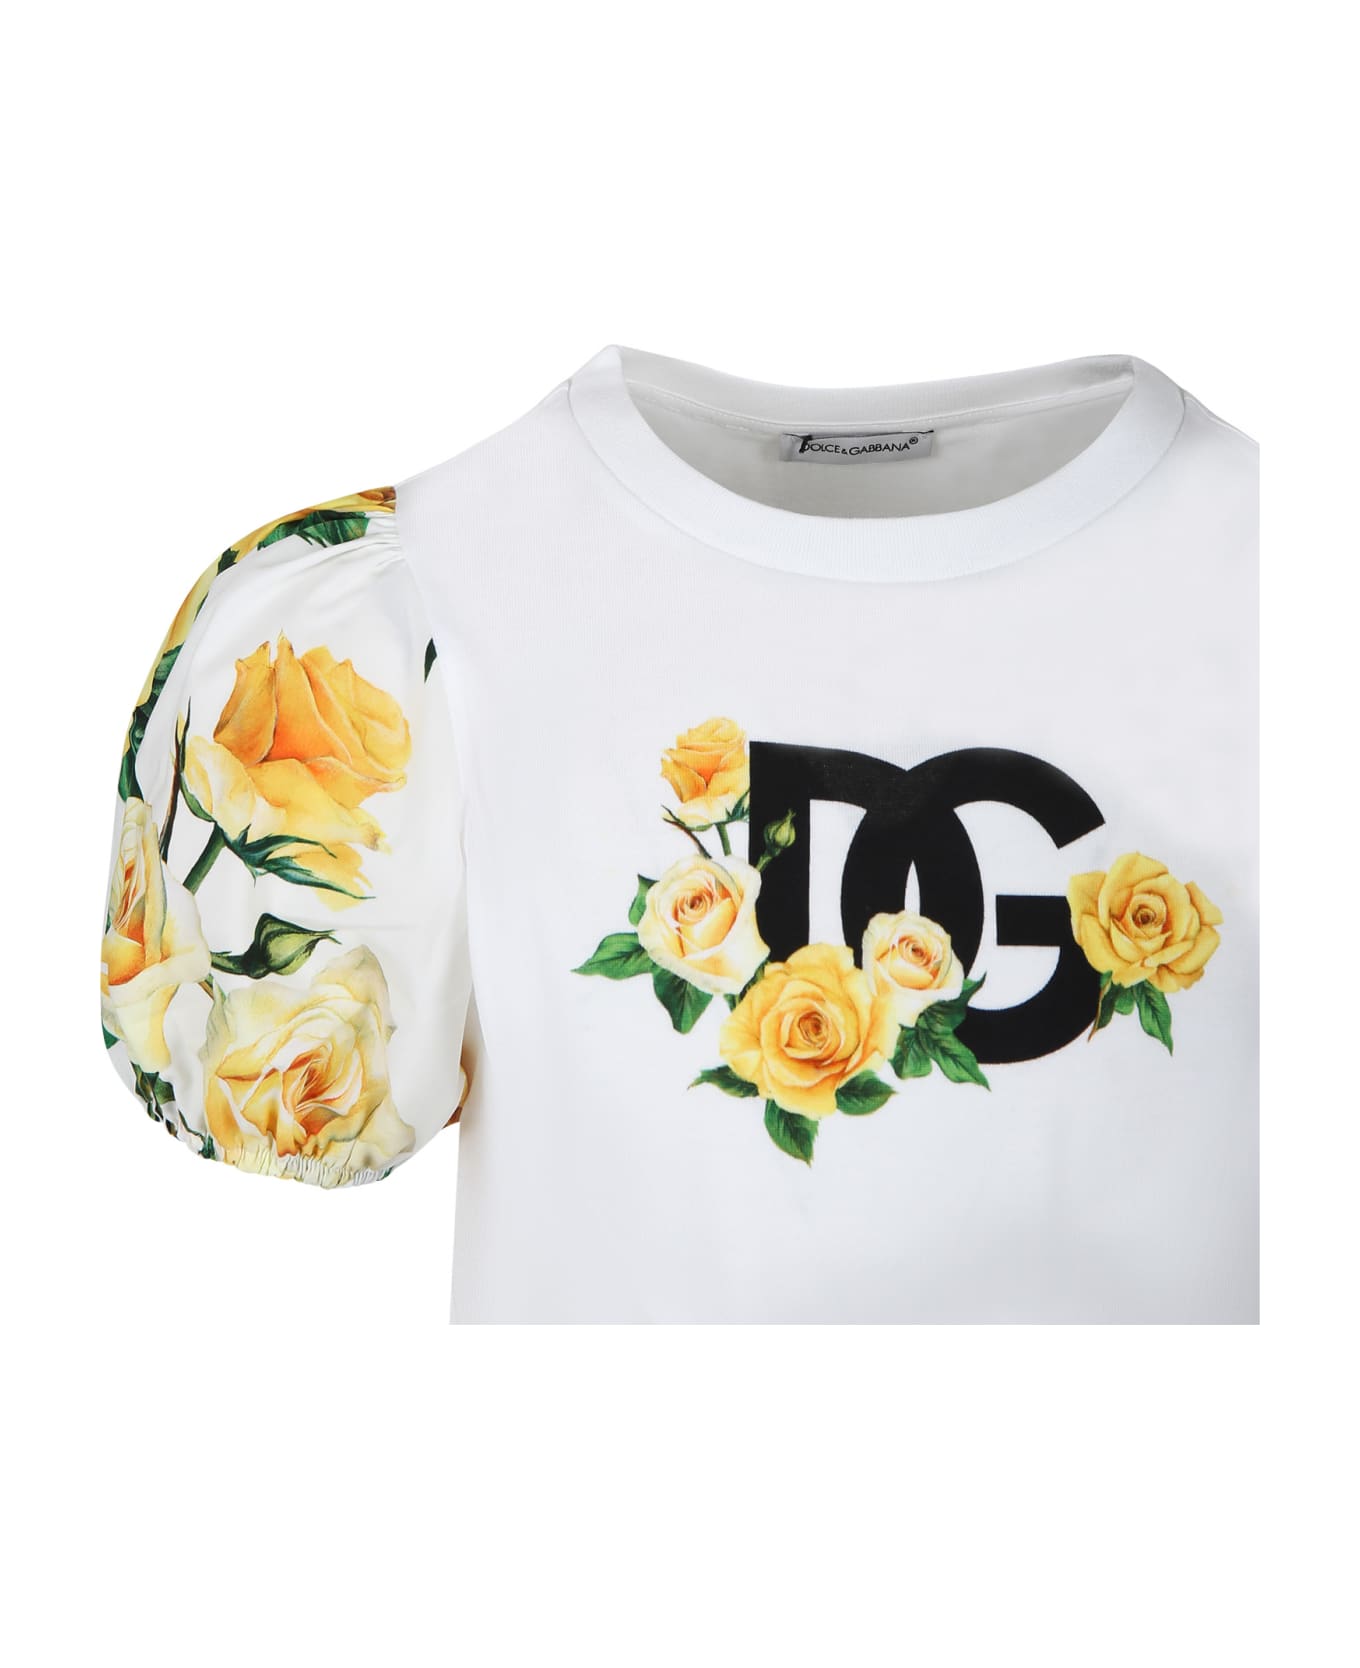 Dolce & Gabbana White T-shirt For Girl With Flowering Pattern - MULTICOLOR